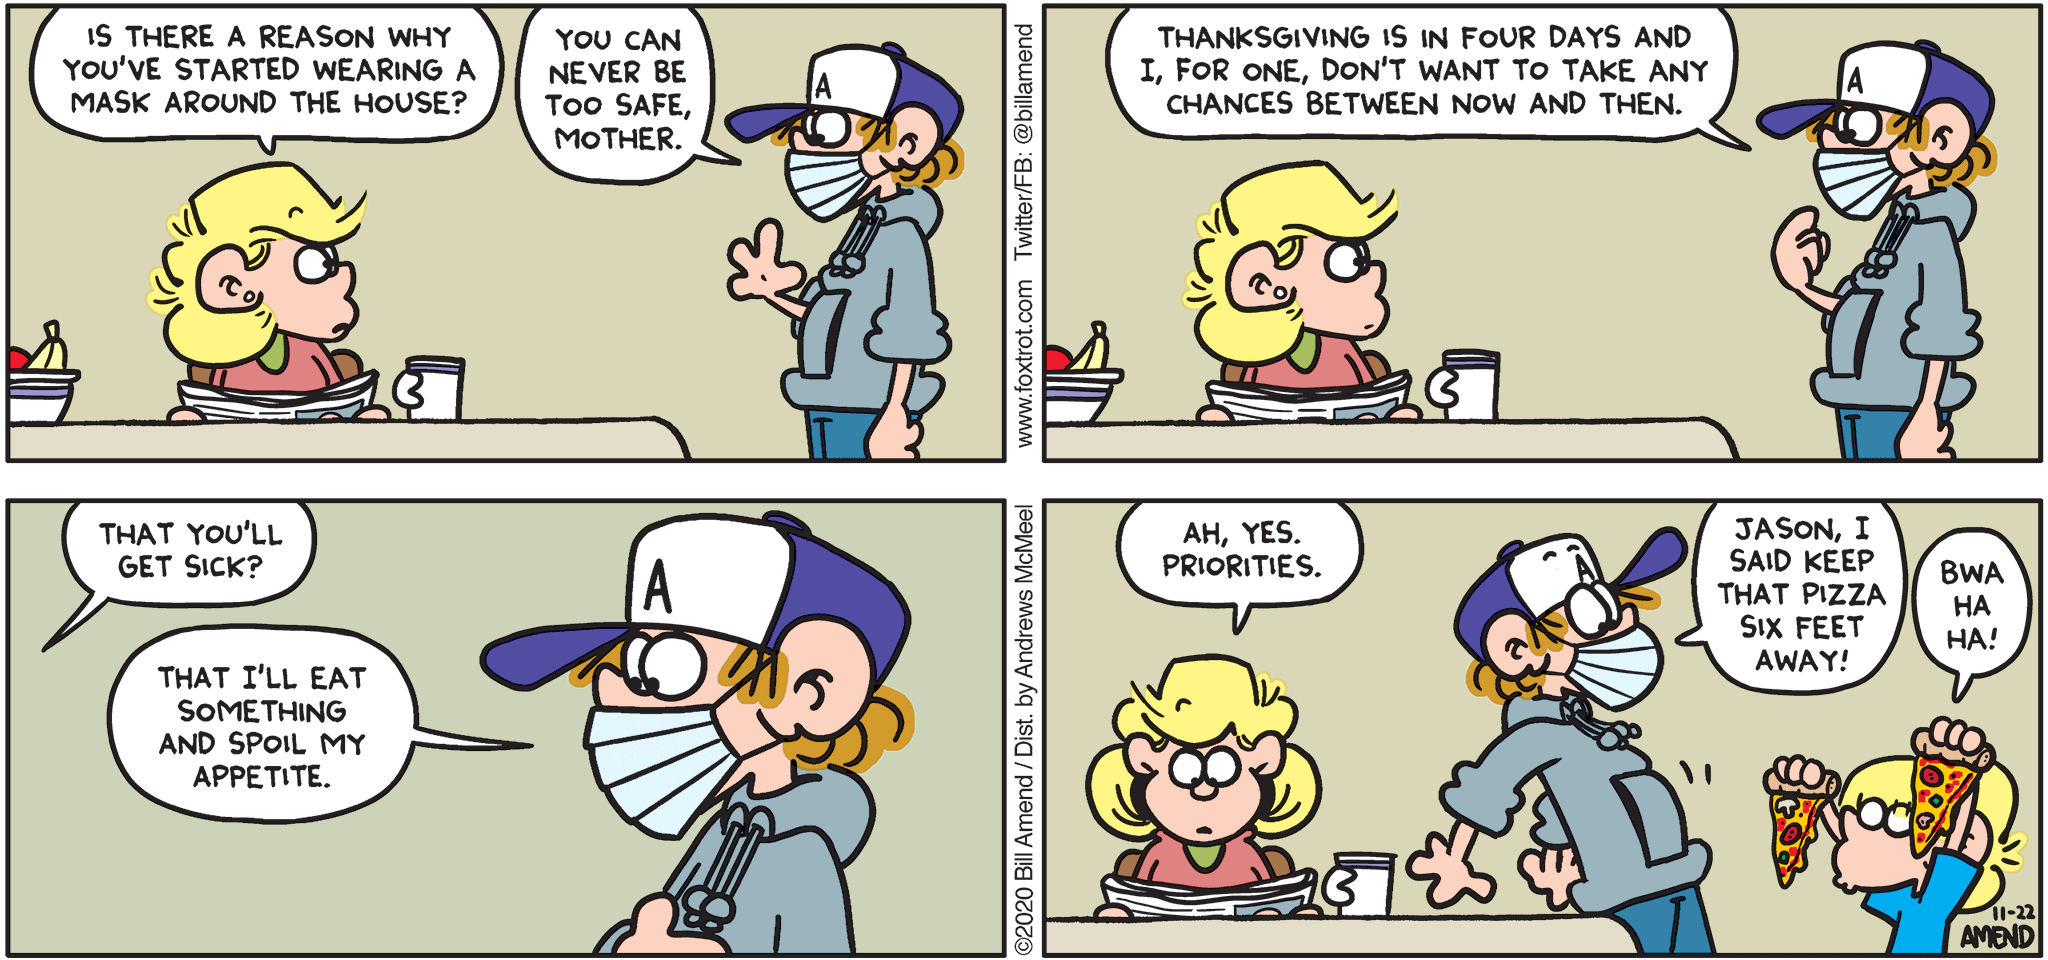 Thanksgiving Comics - FoxTrot comic strip by Bill Amend - "Playing It Safe" published November 22, 2020 - Andy Fox: Is there a reason why you've started wearing a mask around the house? Peter Fox: You can never be too safe, mother. Thanksgiving is in four days and I, for one, don't want to take any chances between now and then. Andy Fox: That you'll get sick? Peter Fox: That I'll eat something and spoil my appetite. Andy Fox: Ah, yes. Priorities. Peter Fox: Jason, I said keep that pizza six feet away! Jason Fox: Bwa ha ha!